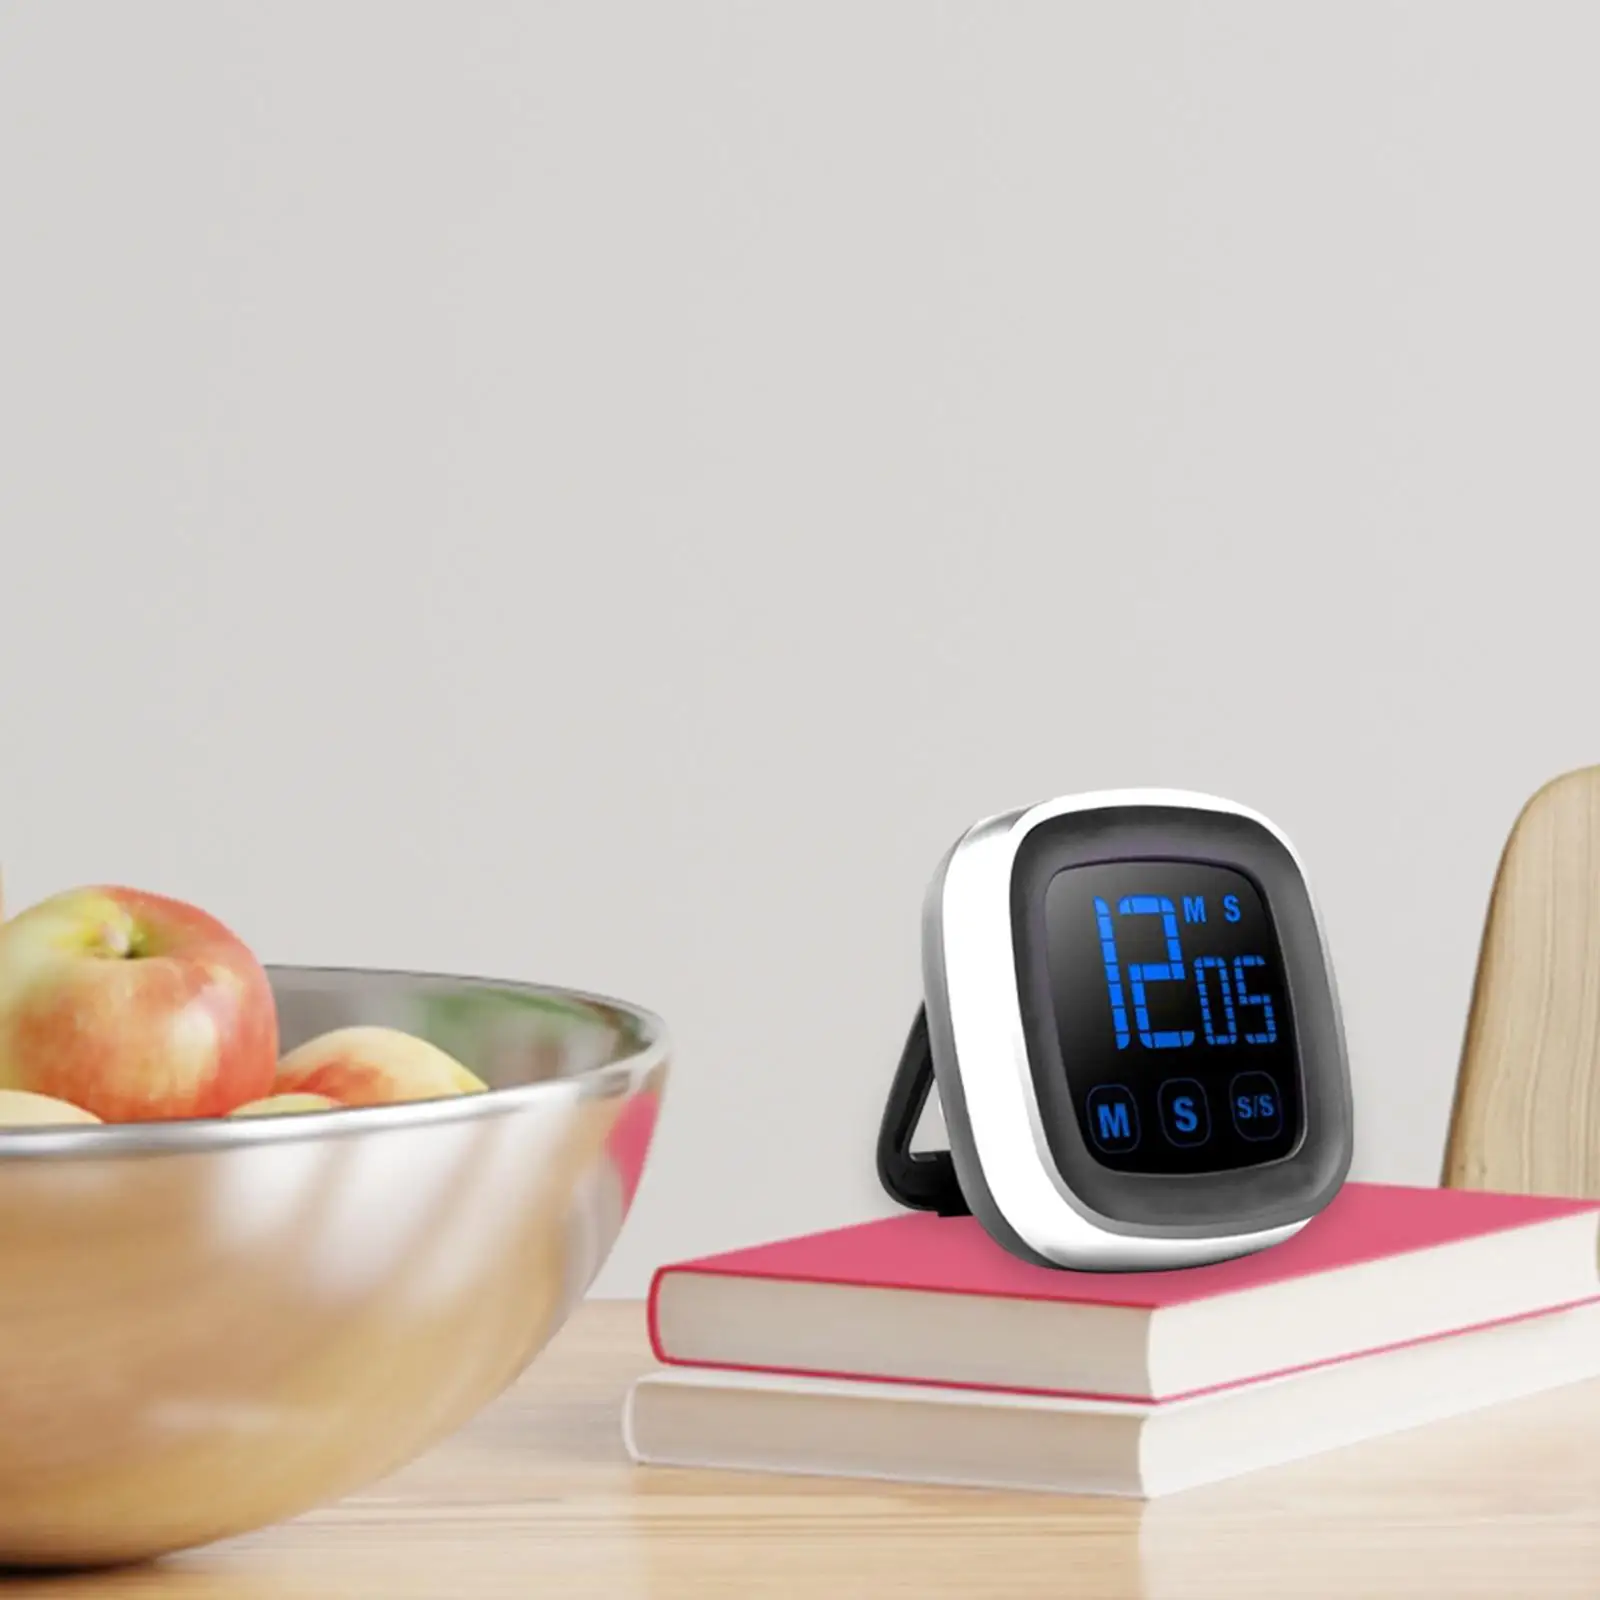 LED Display Digital Timer Count Down up Teachers Kids Large Clearly Screen Clock Loud for Fitness Cooking Study